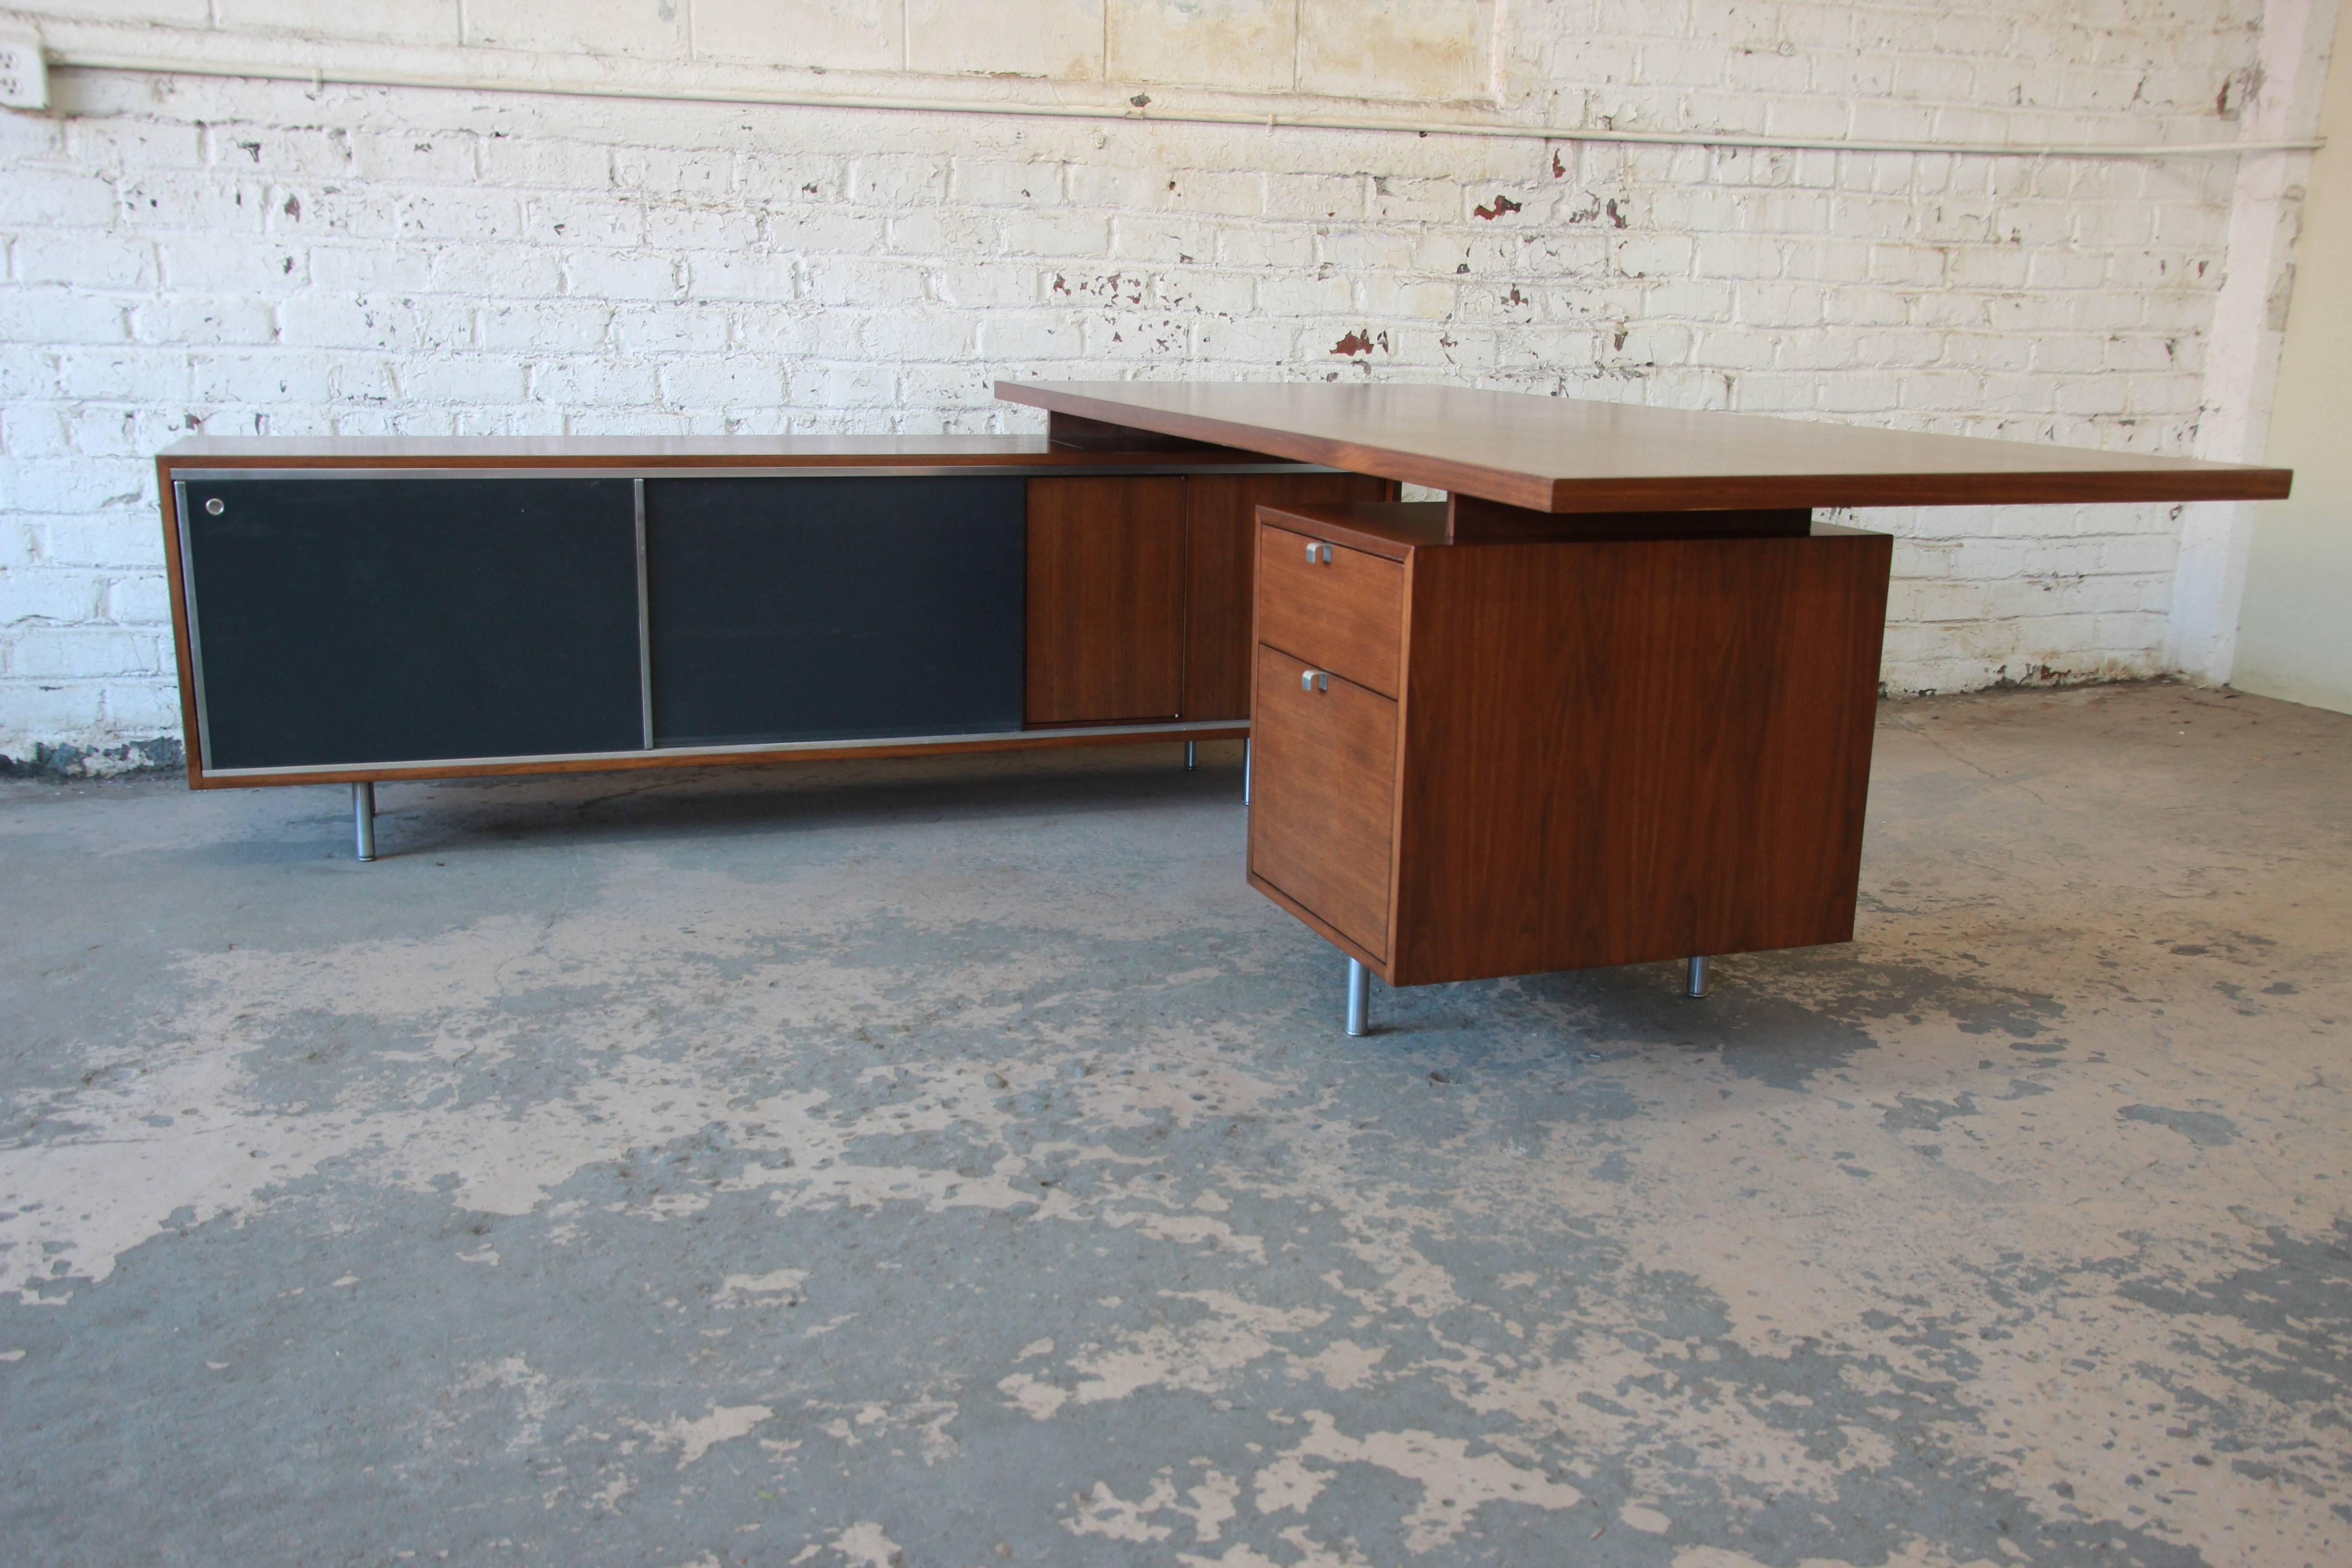 A rare and outstanding Mid-Century Modern L-shaped executive desk designed by George Nelson for Herman Miller. The desk features gorgeous walnut wood grain, with sleek metal feet and hardware. The credenza offers ample room for storage with five